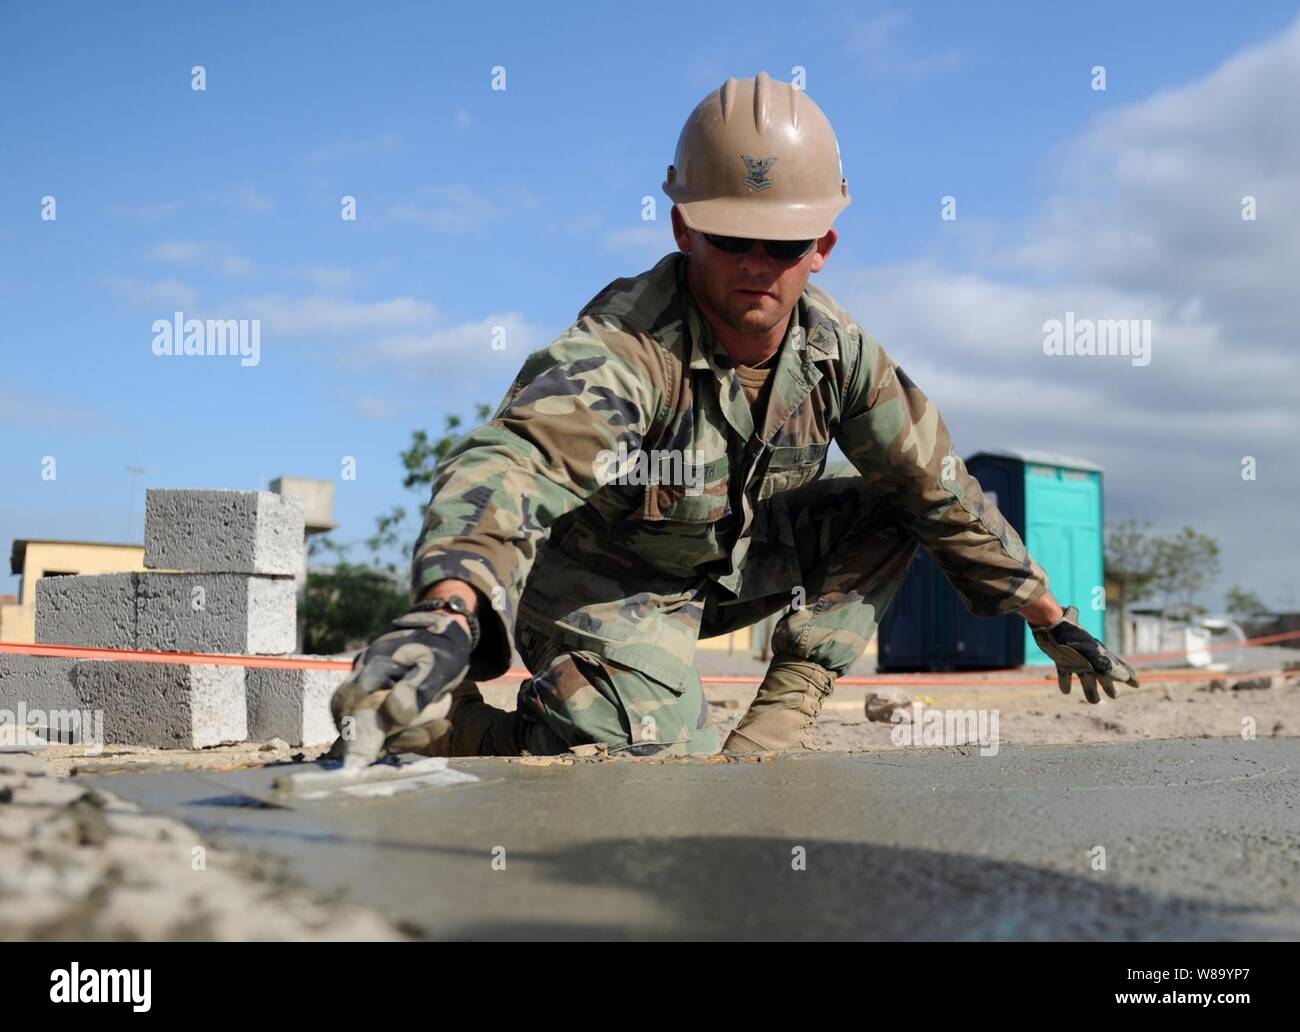 U.S. Navy Petty Officer 2nd Class Andras Toth, assigned to Naval Mobile Construction Battalion 28, trowels the foundation of a new classroom being built at the Jacobo Vera school in Manta, Ecuador, during Southern Partnership Station 2011 on Jan. 11, 2011.  Southern Partnership Station was a deployment of specialty platforms to the U.S. Southern Command area of responsibility in the Caribbean and Central America.  The mission's primary goal was information sharing with navies, coast guards and civilian services throughout the region. Stock Photo